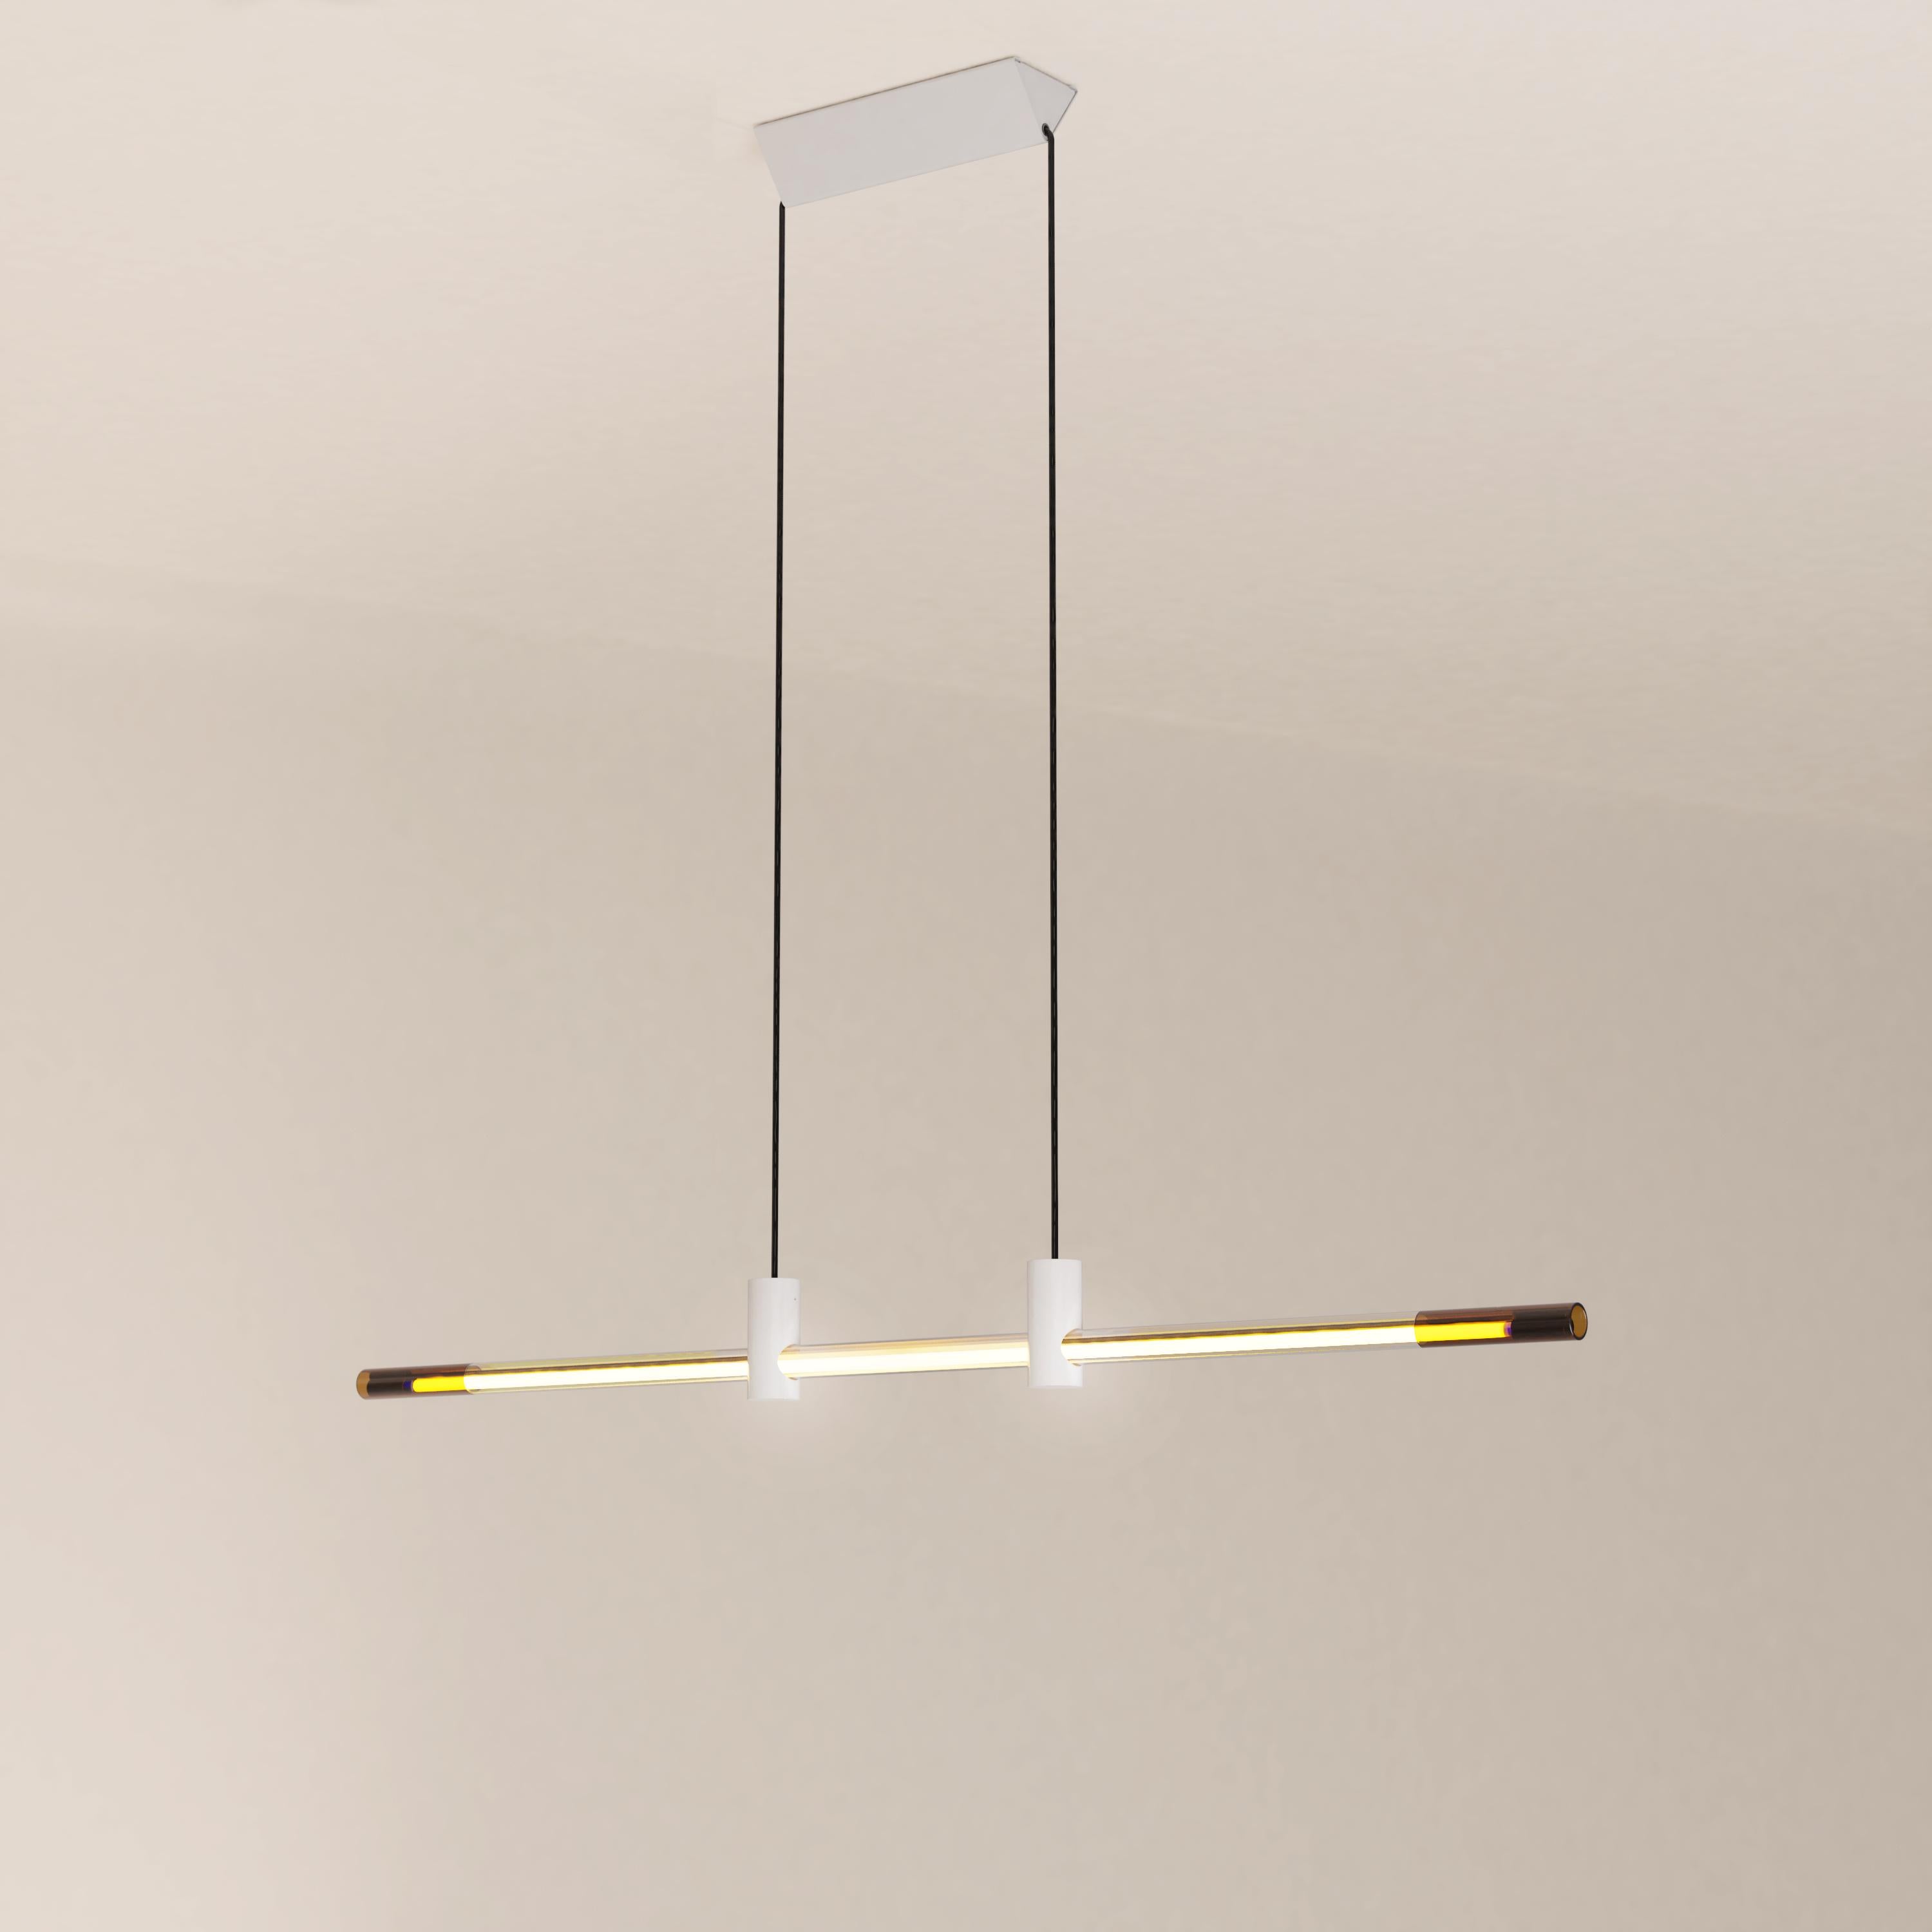 The Ra Line in its glossy white painted finish is a contemporary hand-blown glass and aluminum pendant lighting with cold cathode neon.

The Ra Line is distinguished by a marked opposition between heaviness and lightness. The assemblage of the